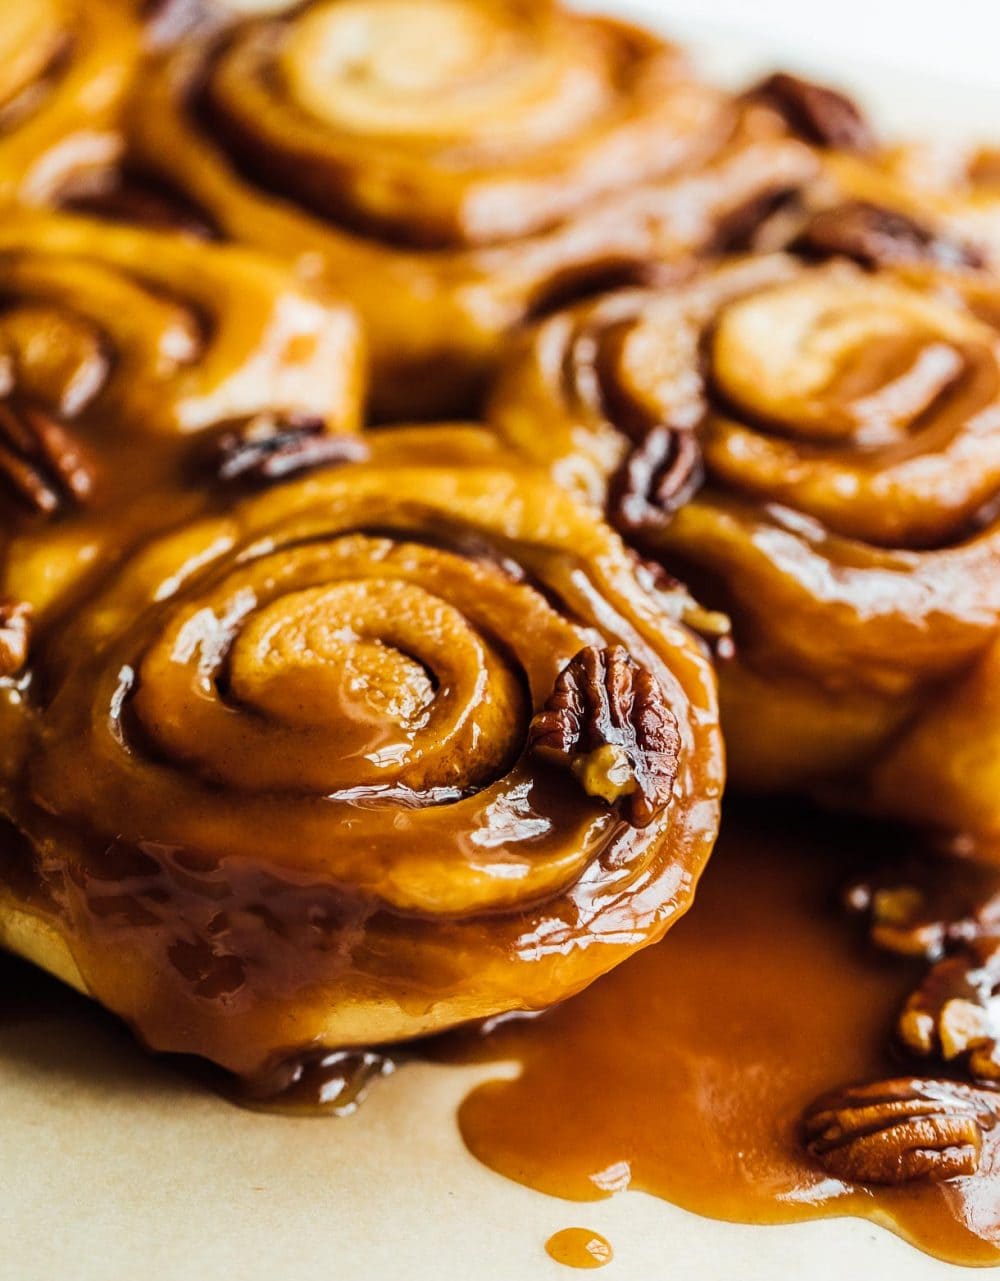 Sourdough sticky buns are baked and sitting on parchment paper, caramel is surrounding them.